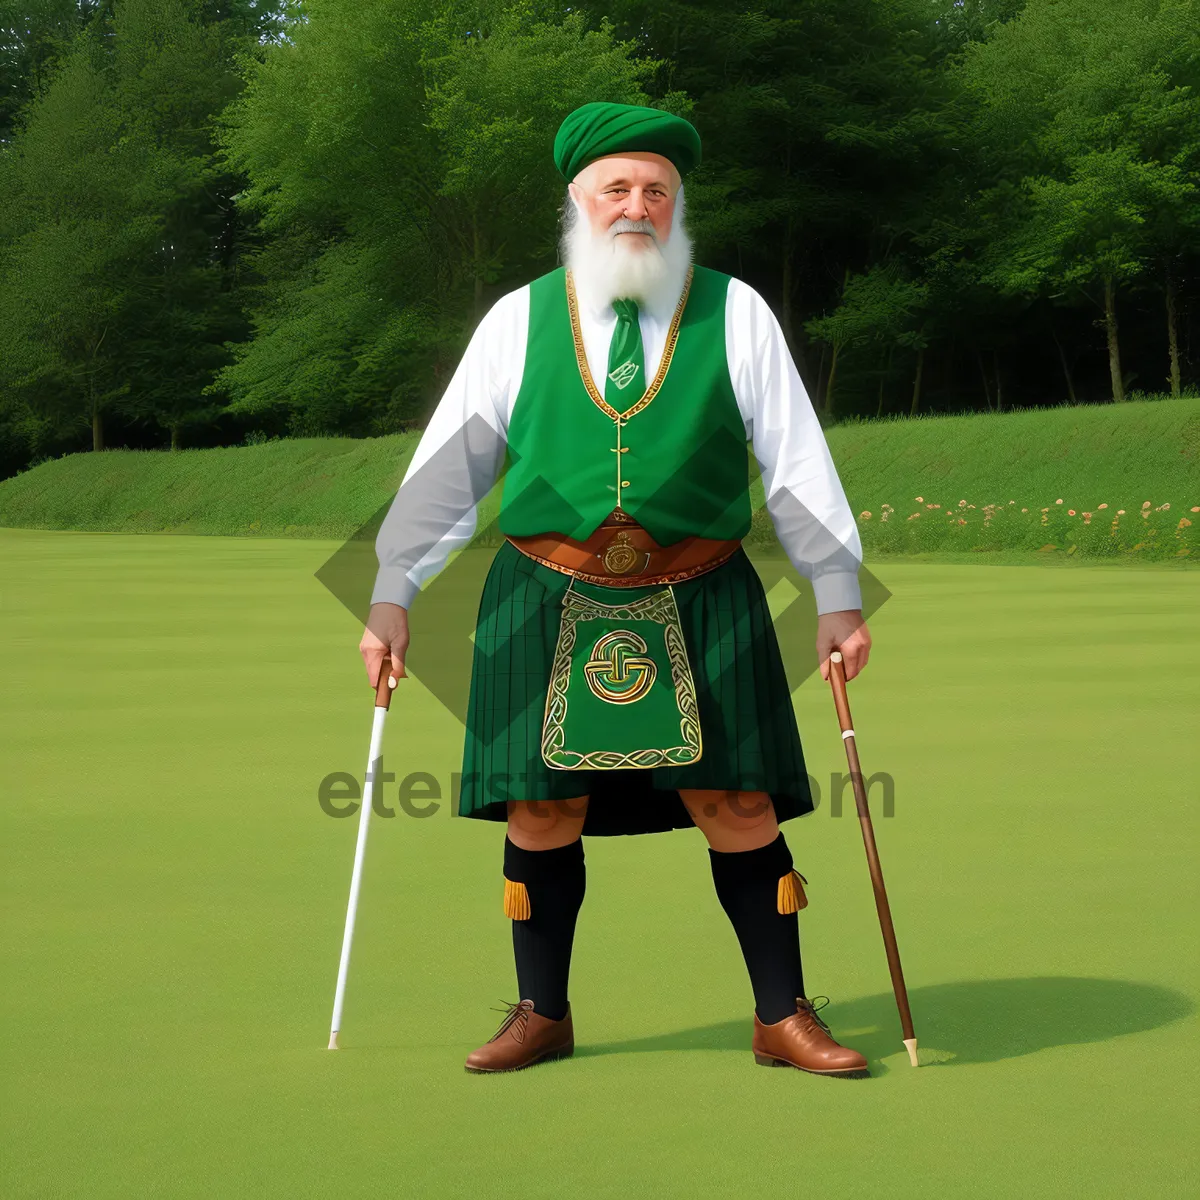 Picture of Active Golfer Enjoying Summer Game on Green Fairway